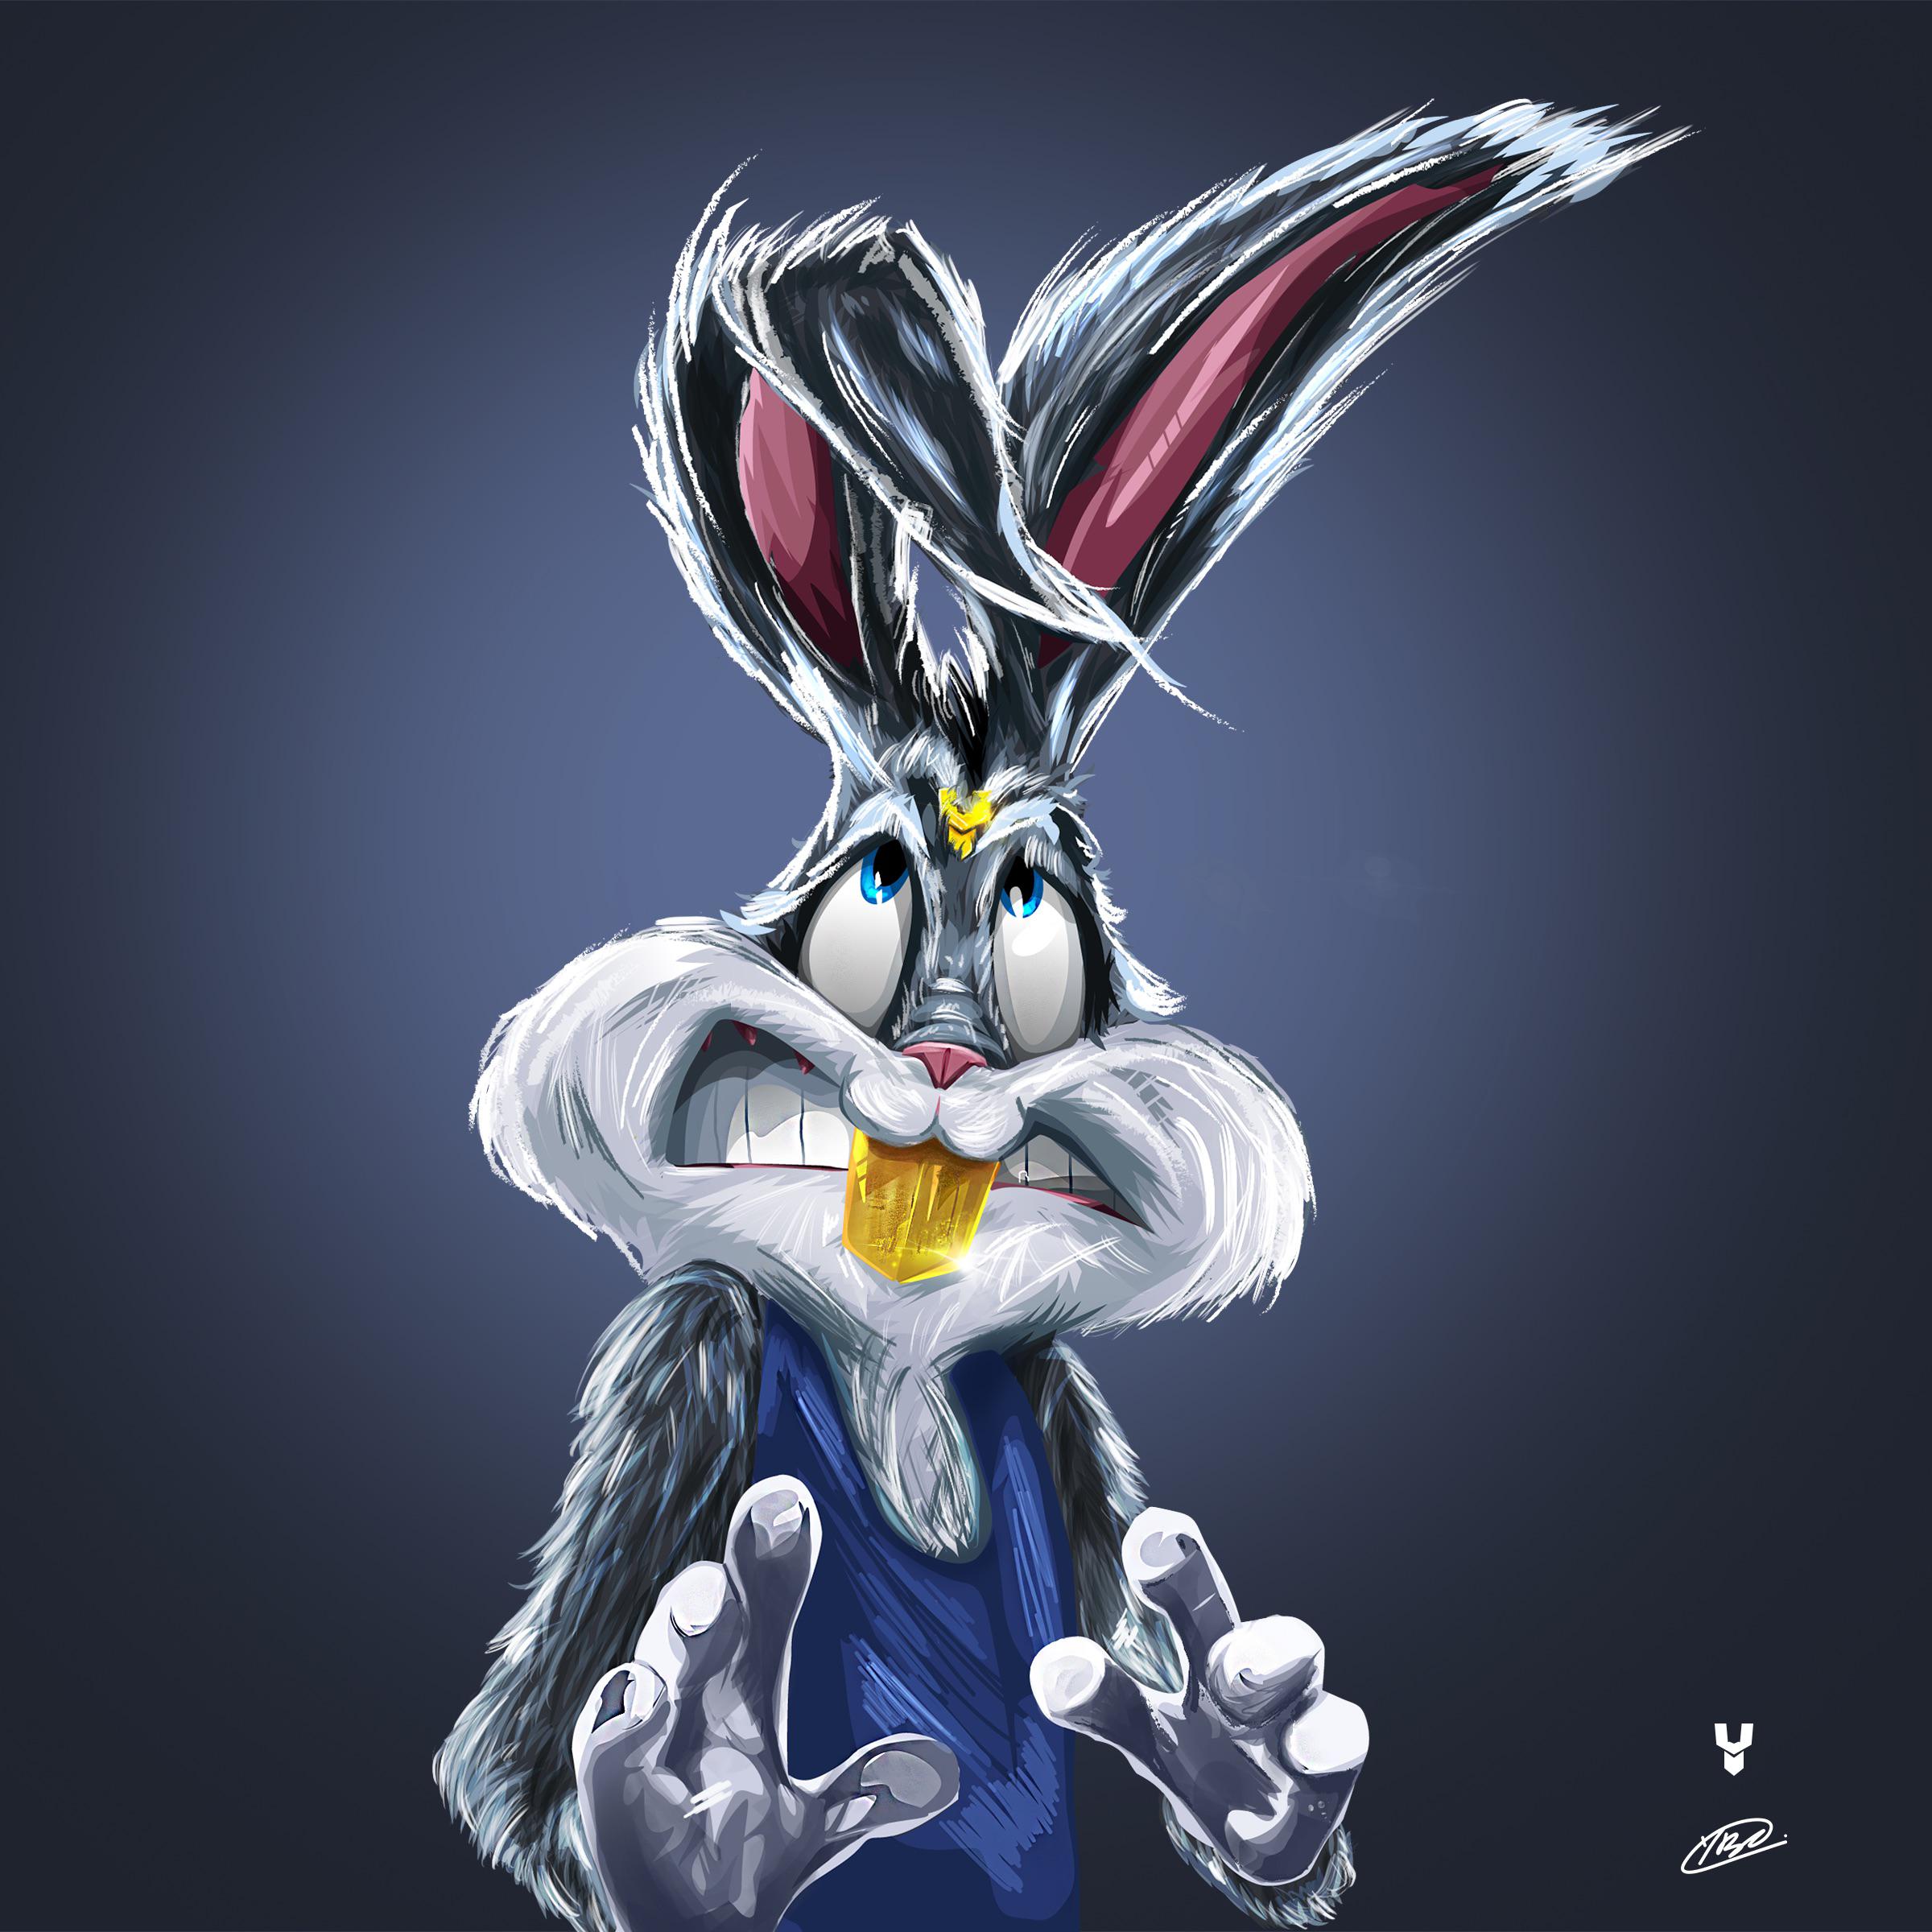 Bugs Bunny is a fictional character and one of the most popular and recognizable characters in the Looney Tunes and Merrie Melodies animated film series produced by Warner Bros. - Bugs Bunny